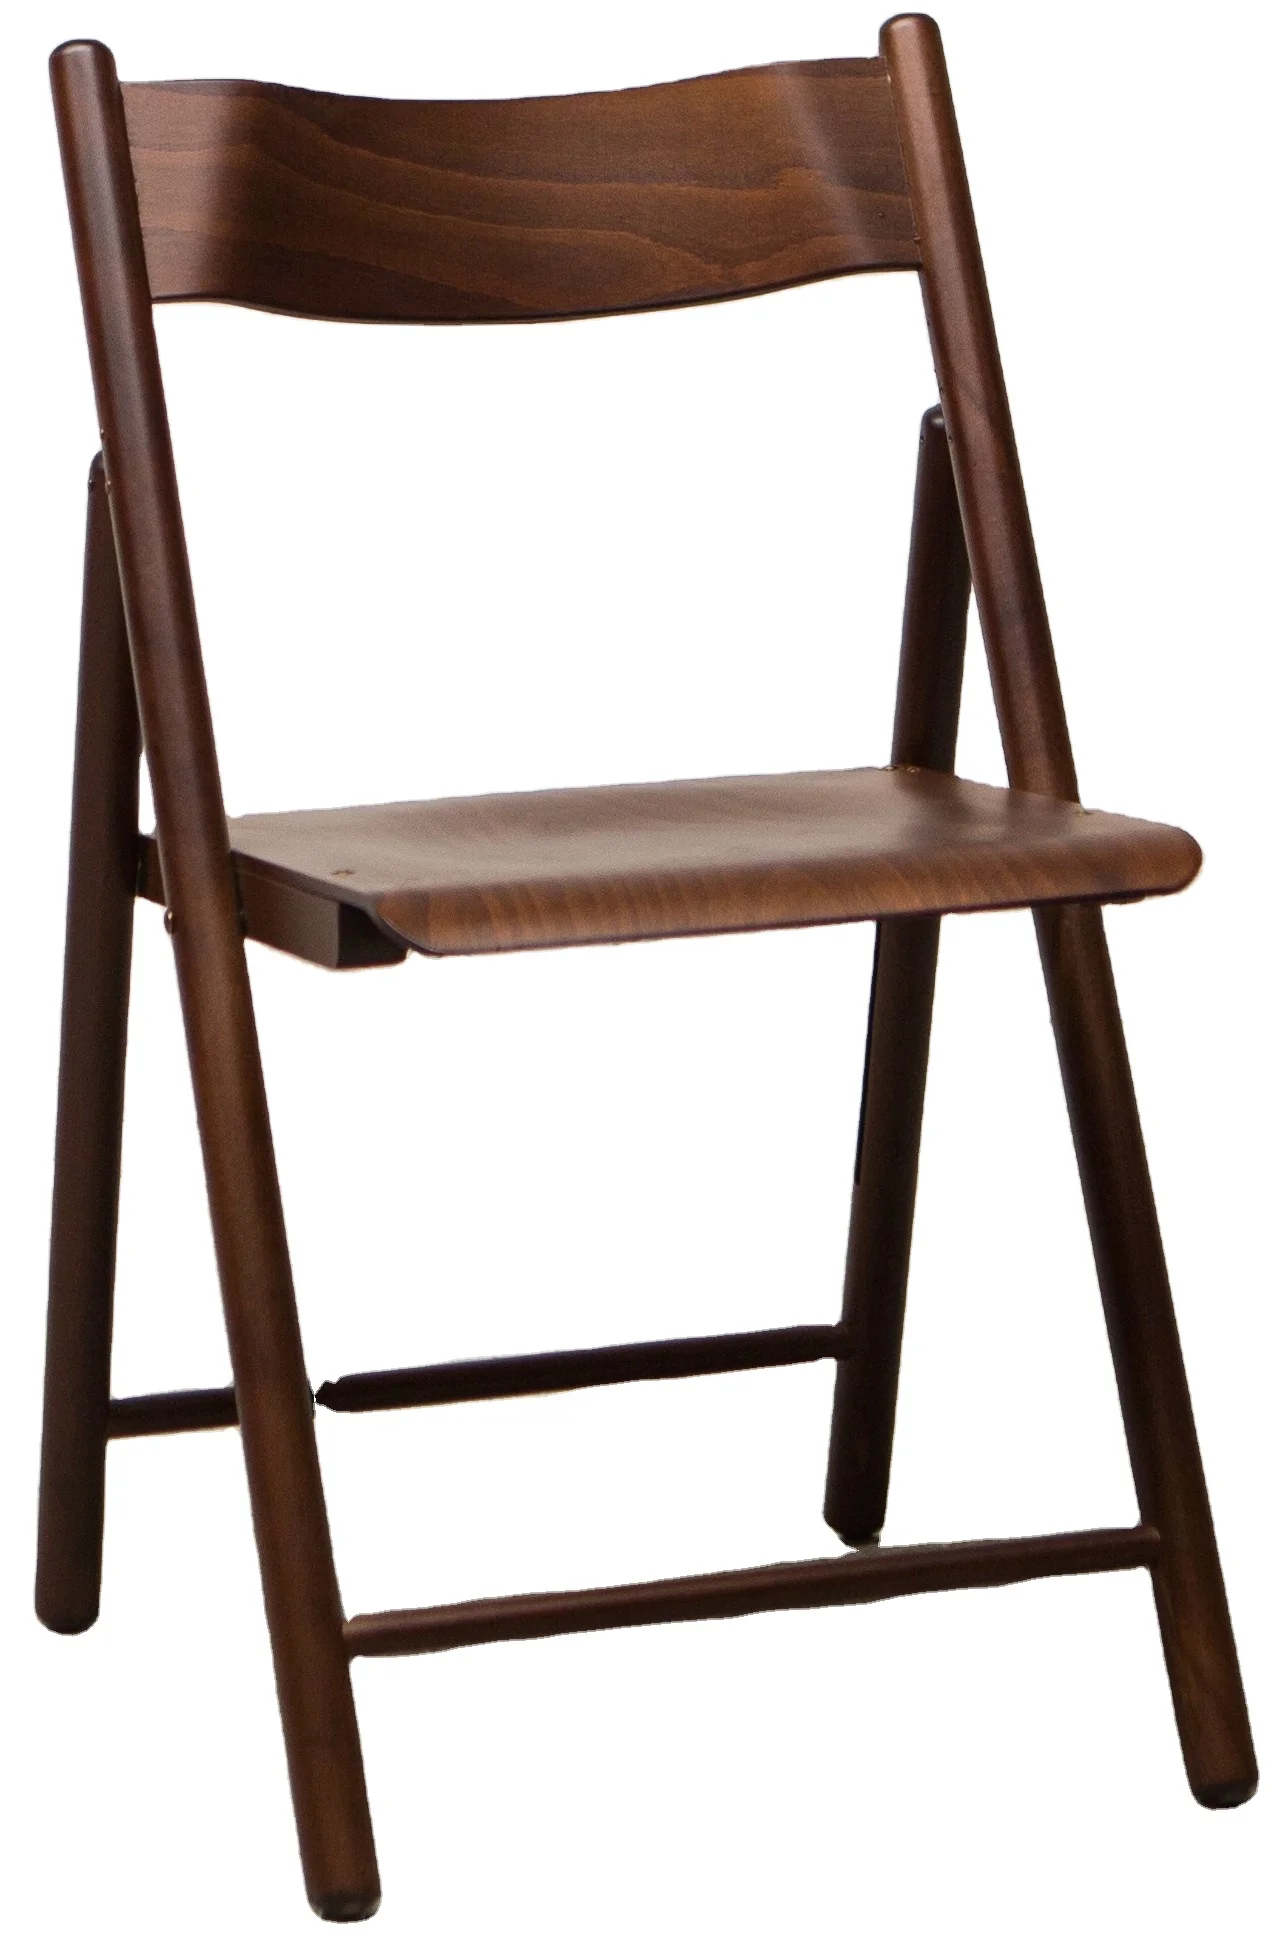 WALNUT PLYWOOD 184 FOLDING CHAIR TOP QUALITY ITALIAN DESIGN COMFORTABLE SAVING SPACE RESTAURANT DINING CAFE